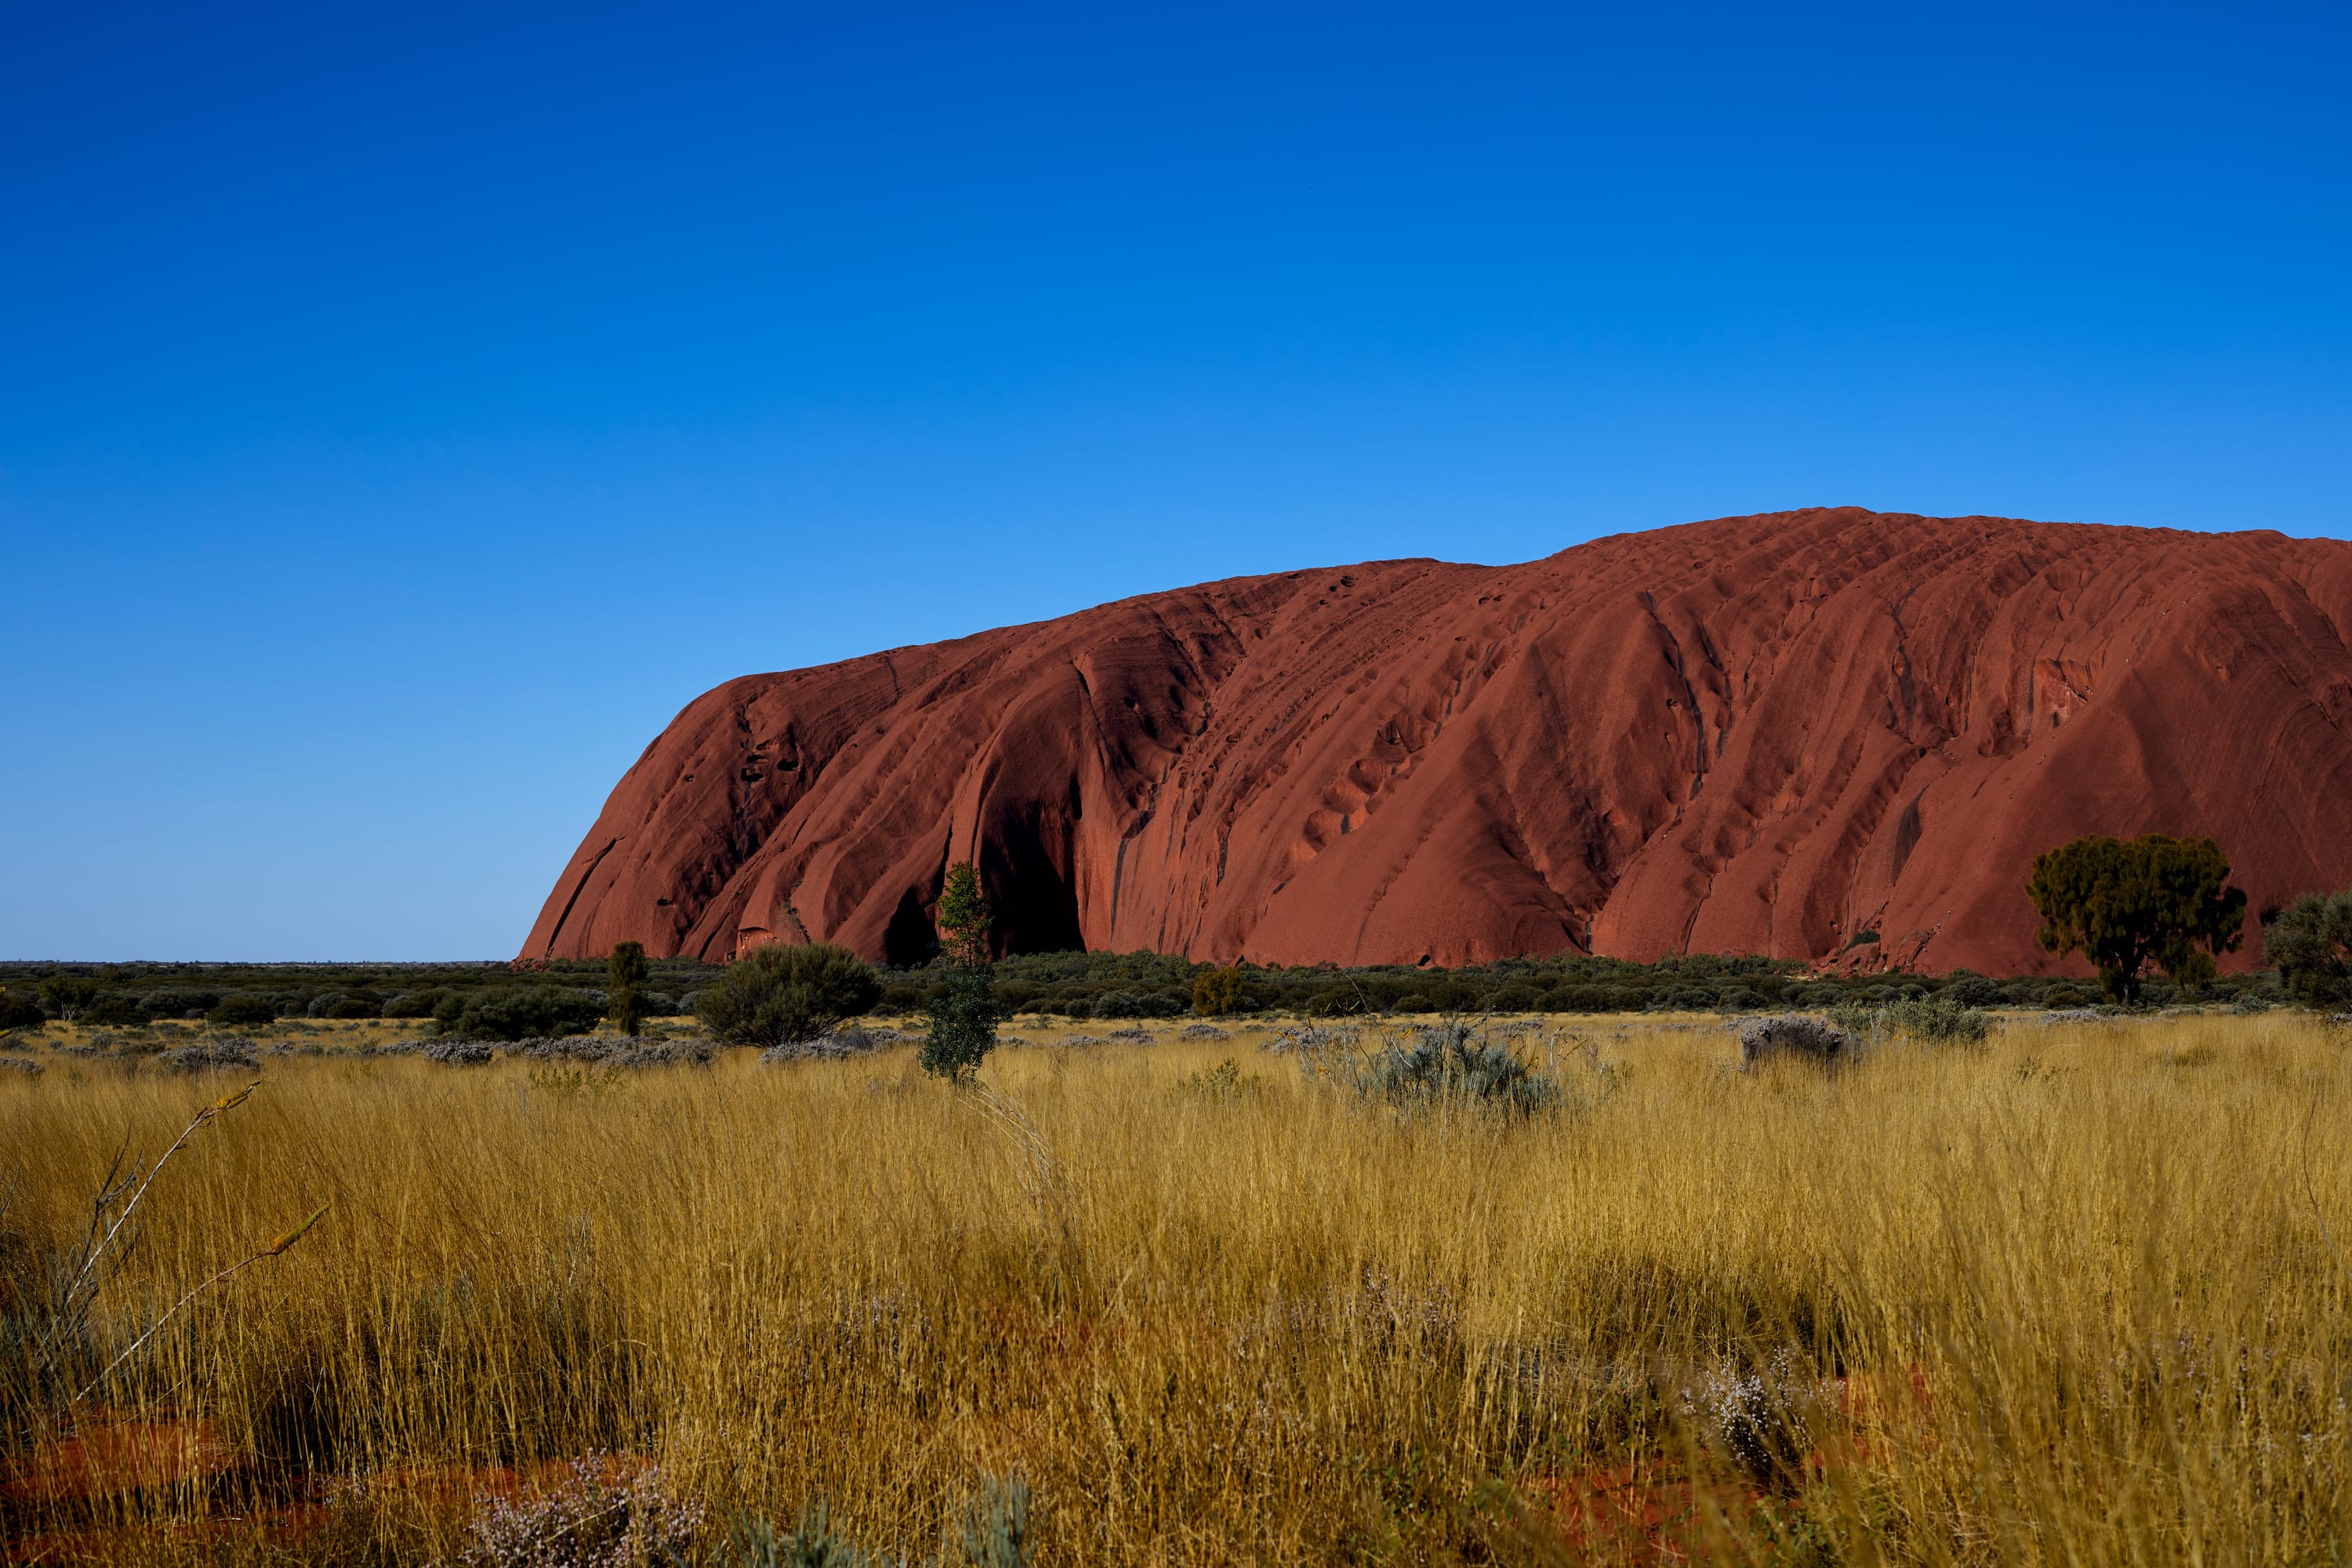 Showing respect through photography: The case of Uluru post image